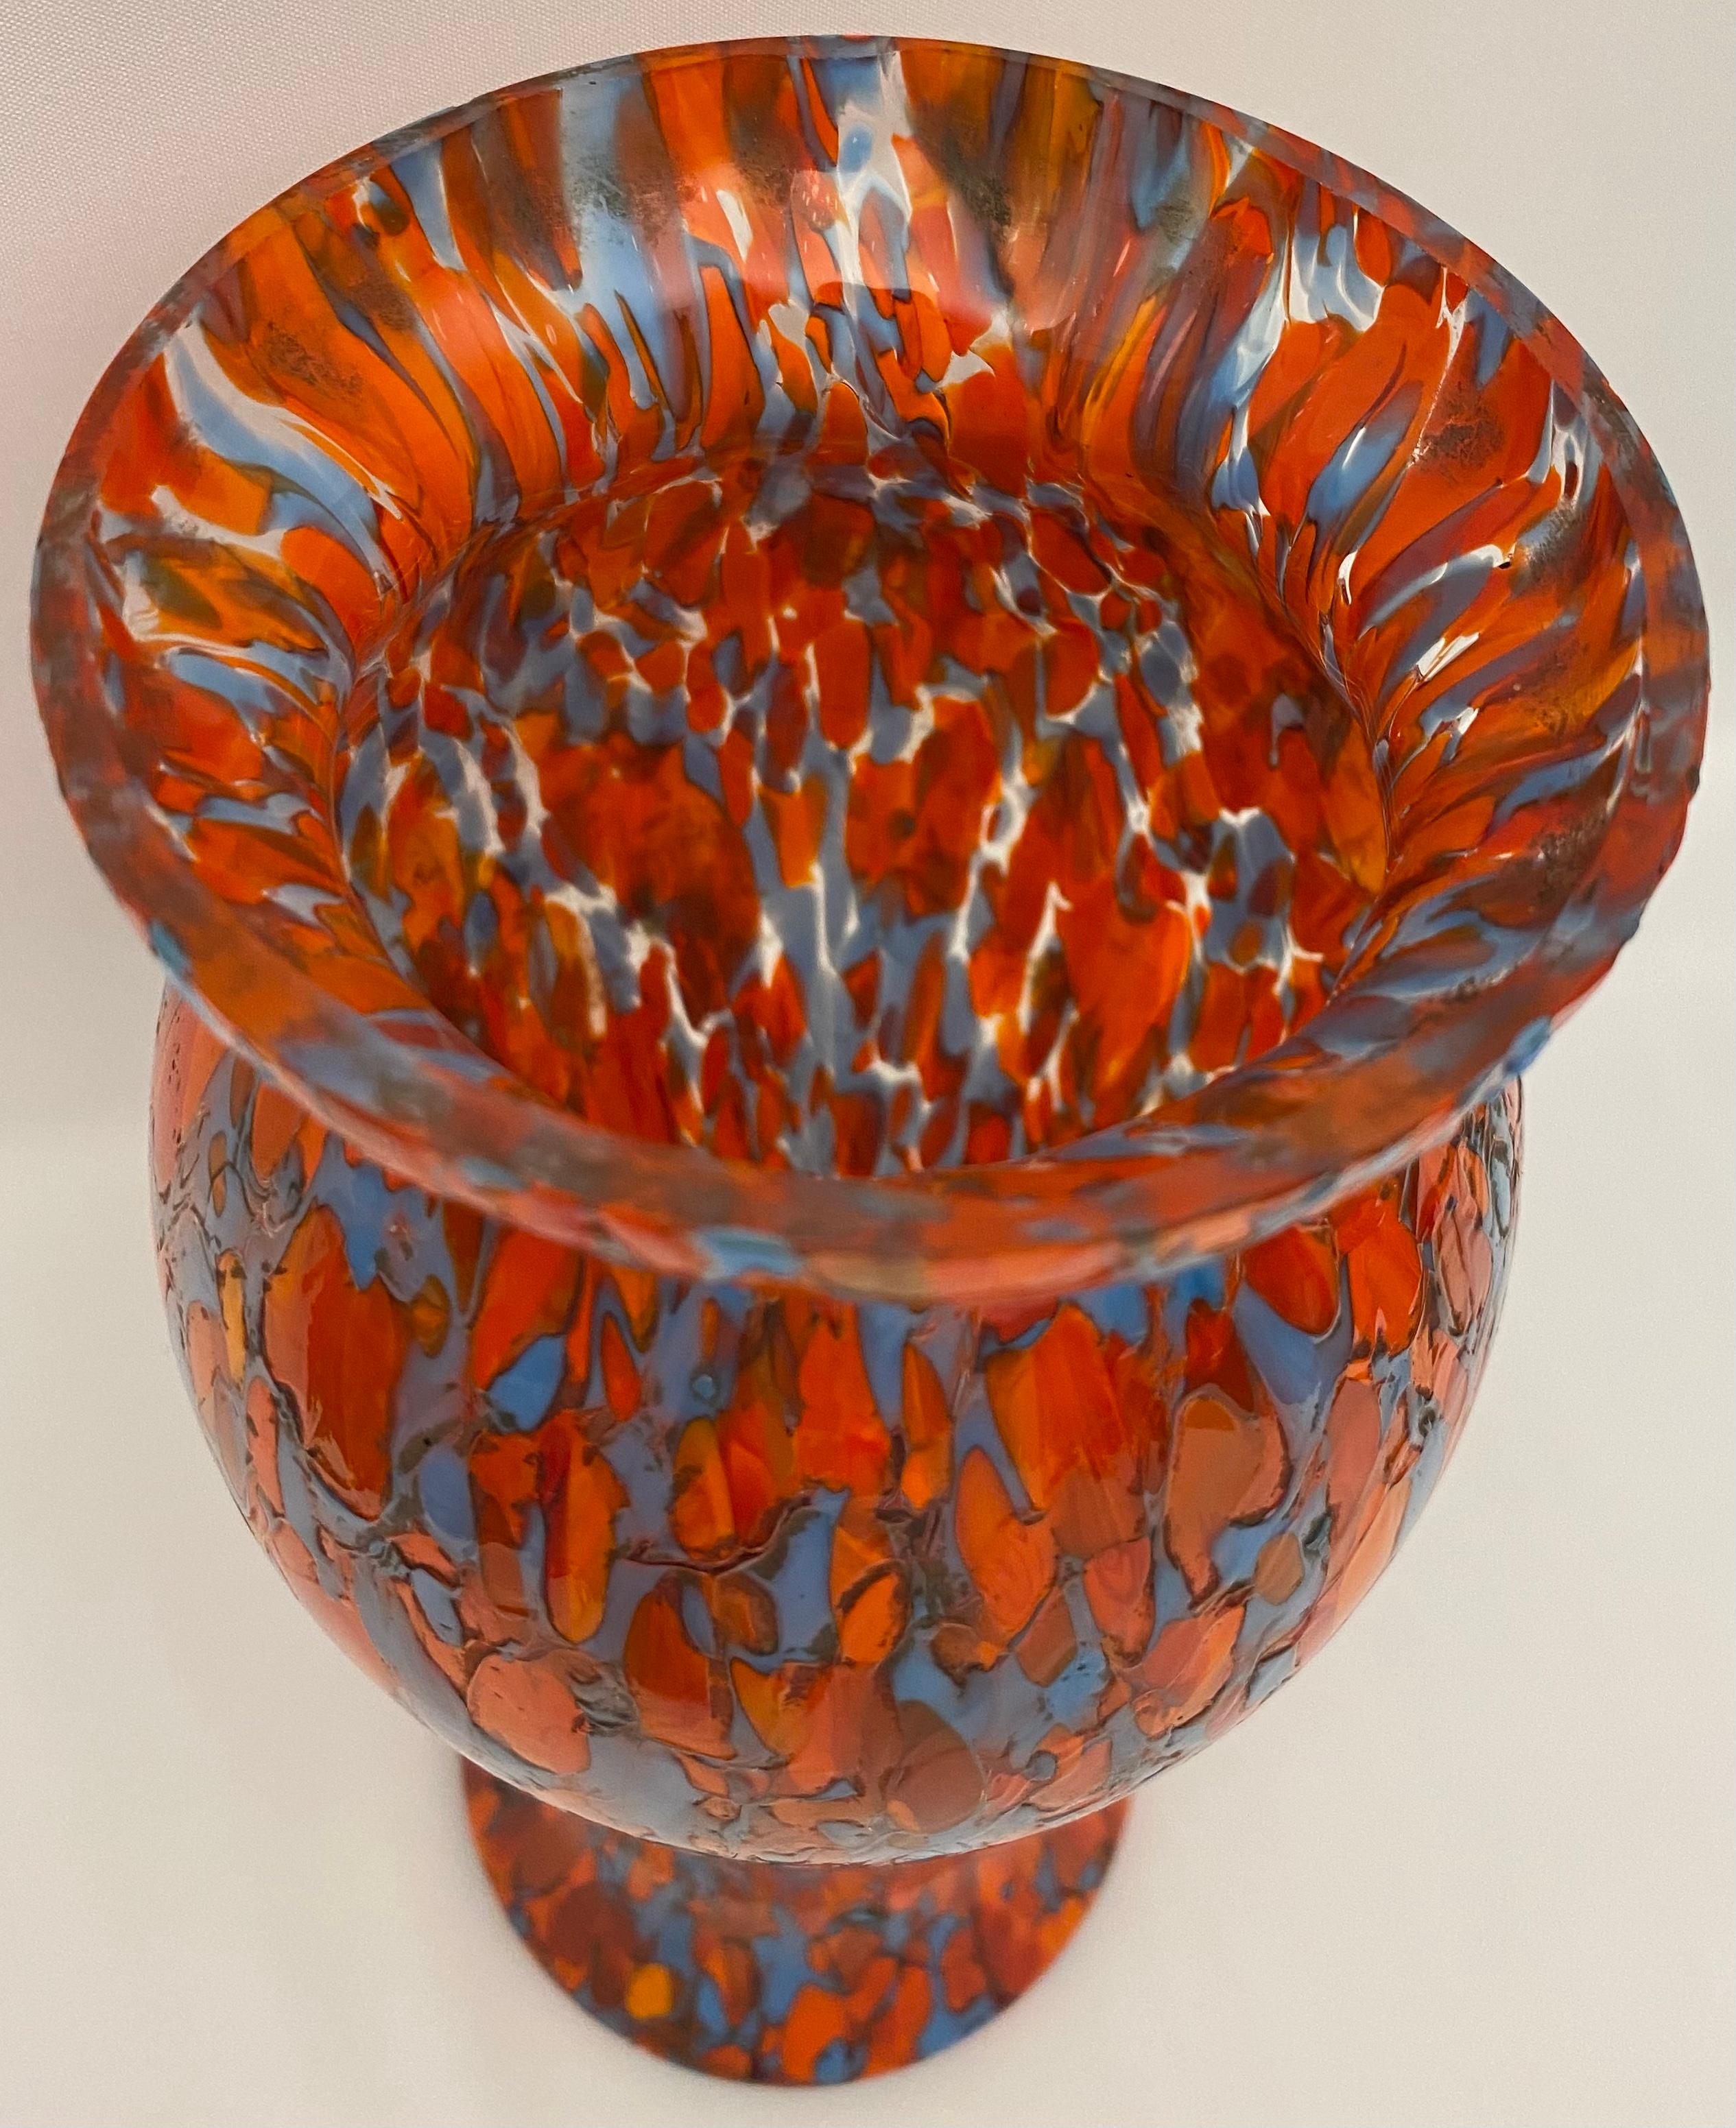 A beautiful multi-colored French Art Deco style mouth-blown art glass vase. 
Wonderful details and very good condition. 

Would enhance any setting. 
Measures: 10 1/4